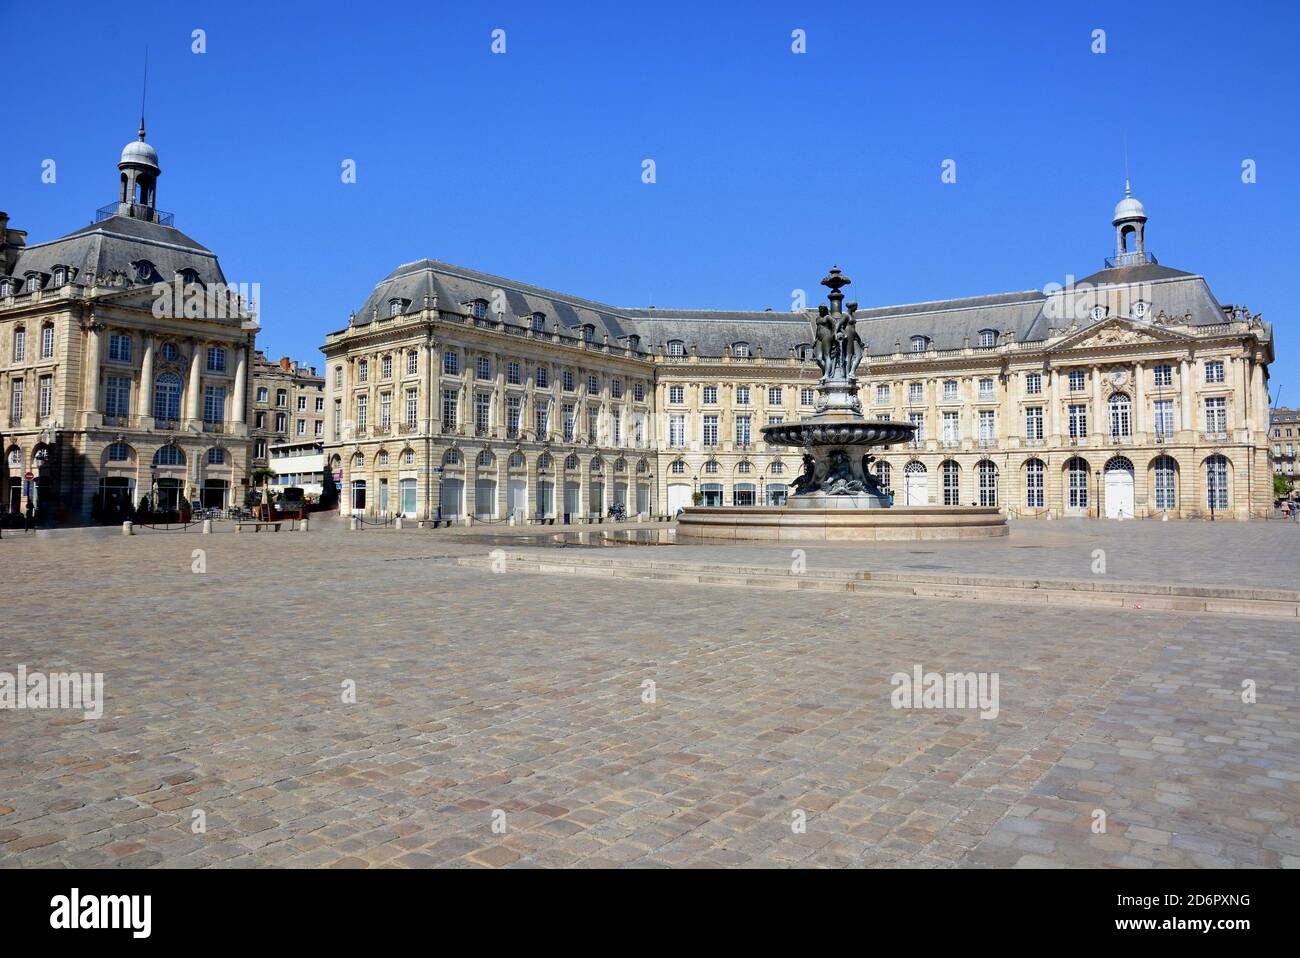 France, Aquitaine, Place of the Bourse, this place is representative of the classic architectural art of the 18th century. Stock Photo